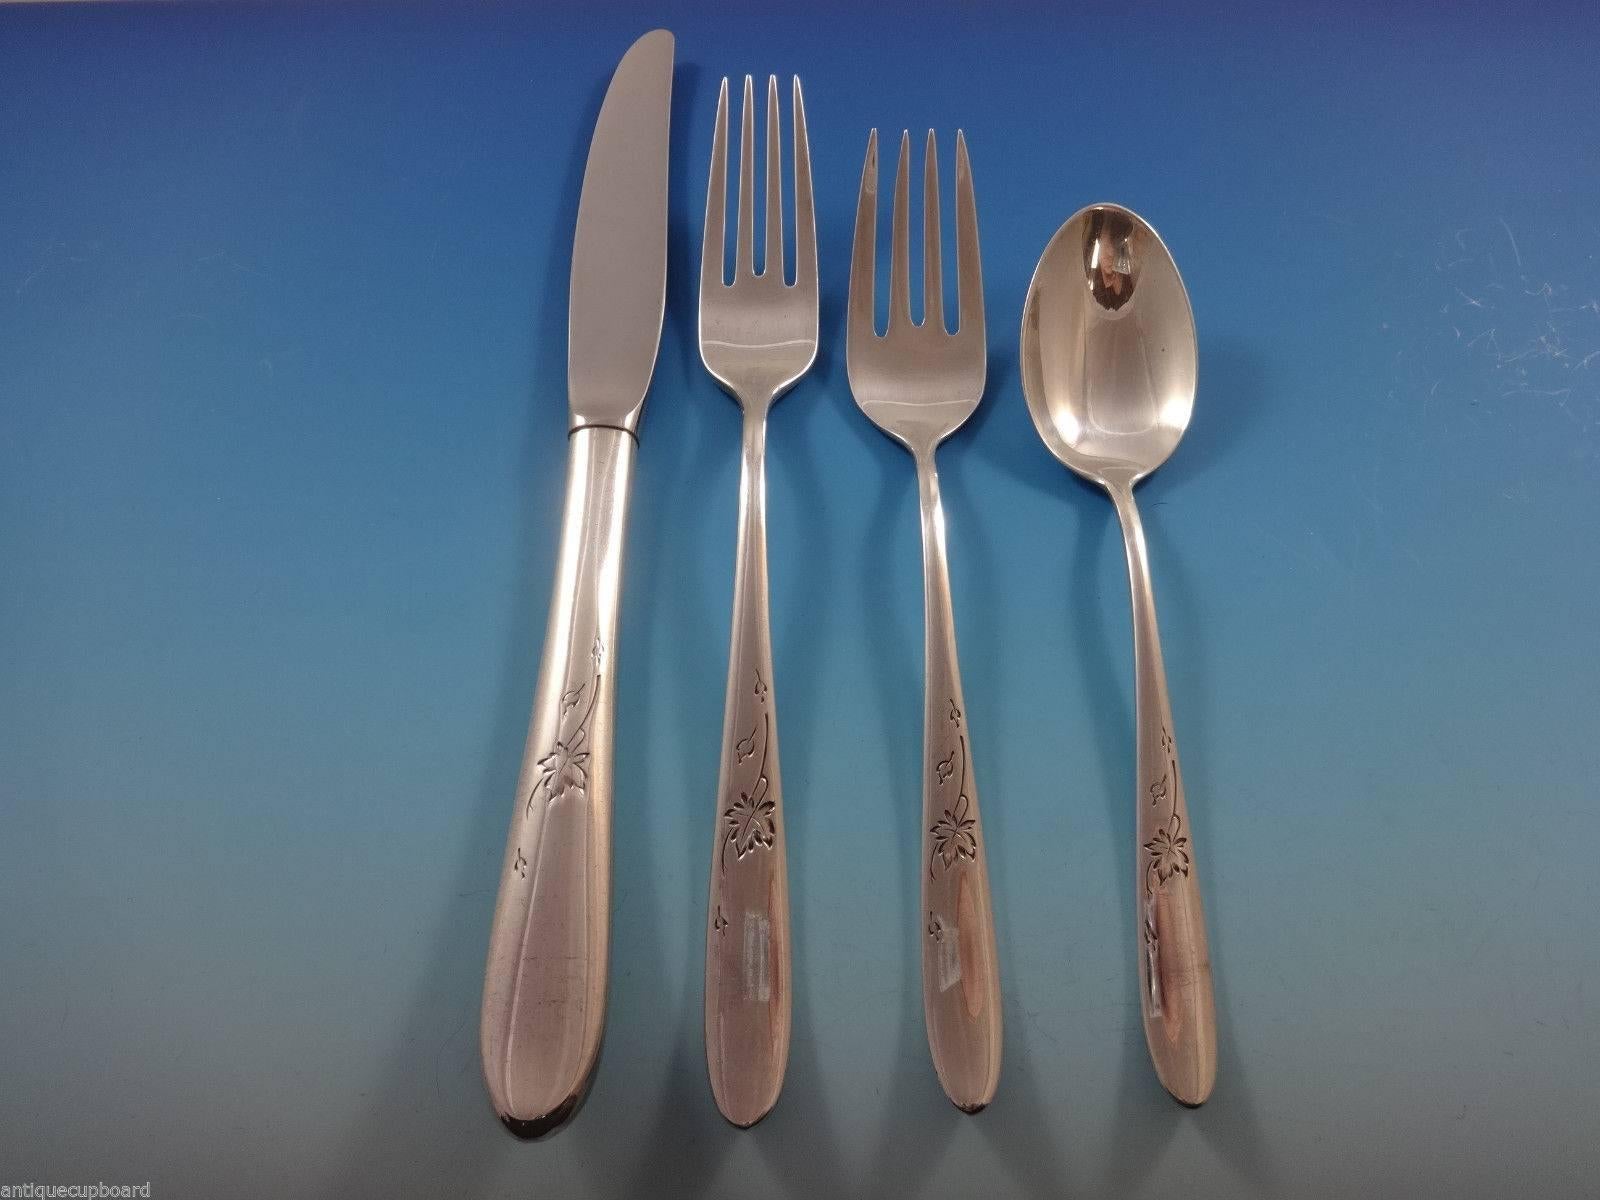 Autumn Leaves by Reed & Barton sterling silver flatware set of 32 pieces. This set includes:

Eight knives, 9